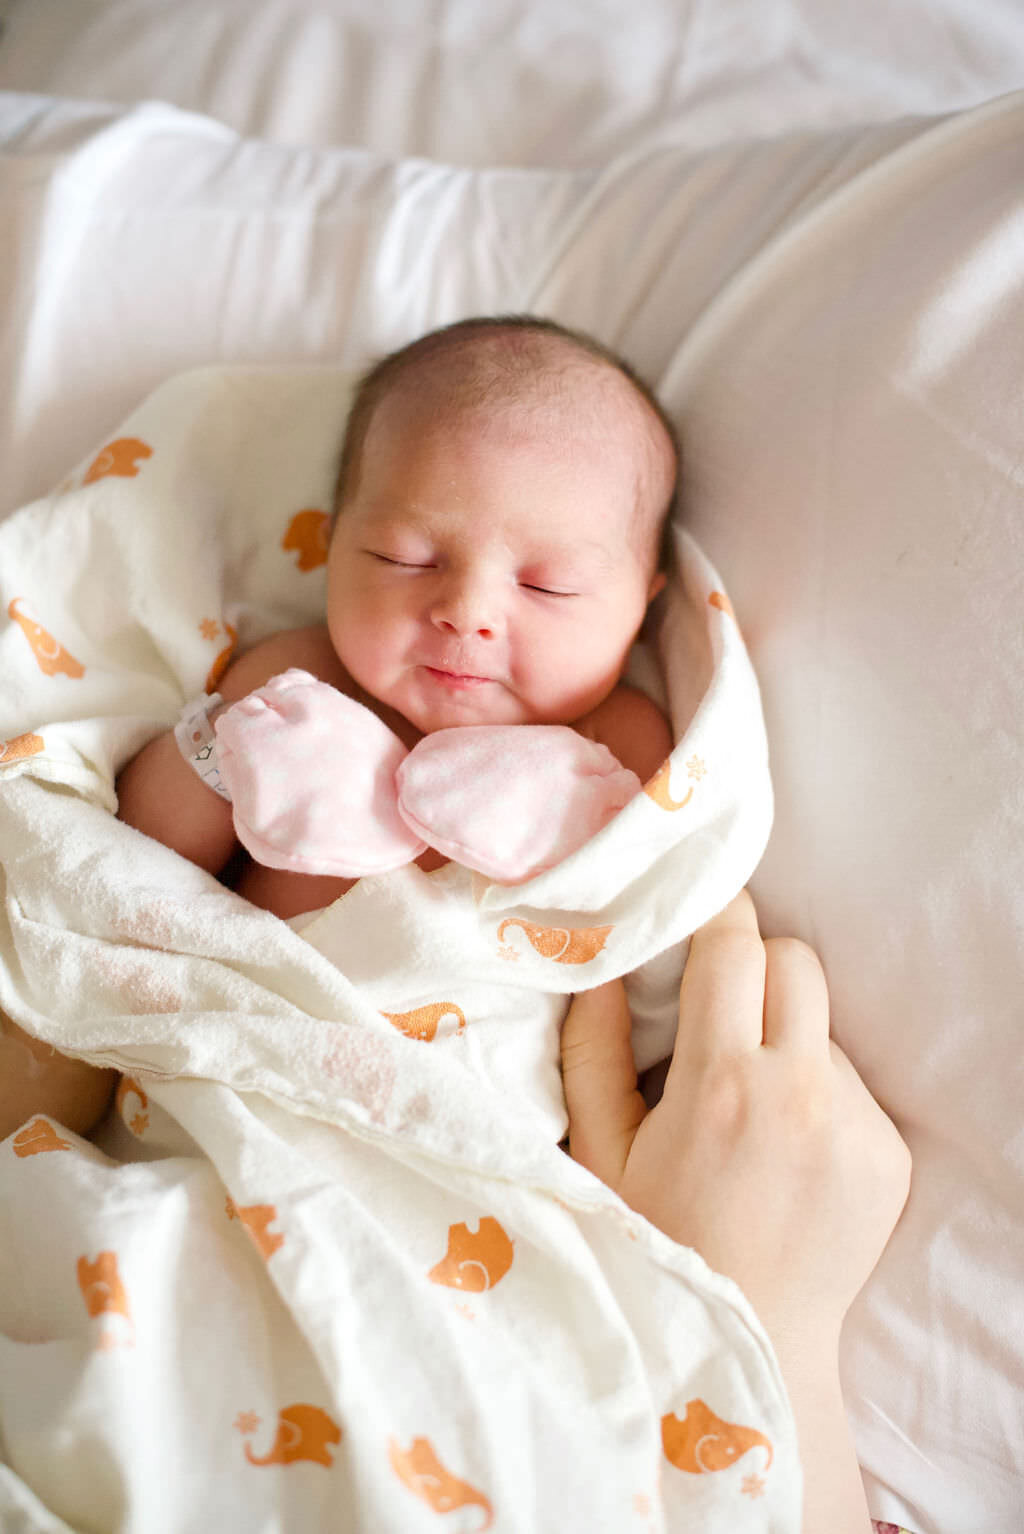 A newborn with pink gloves on sleeping.